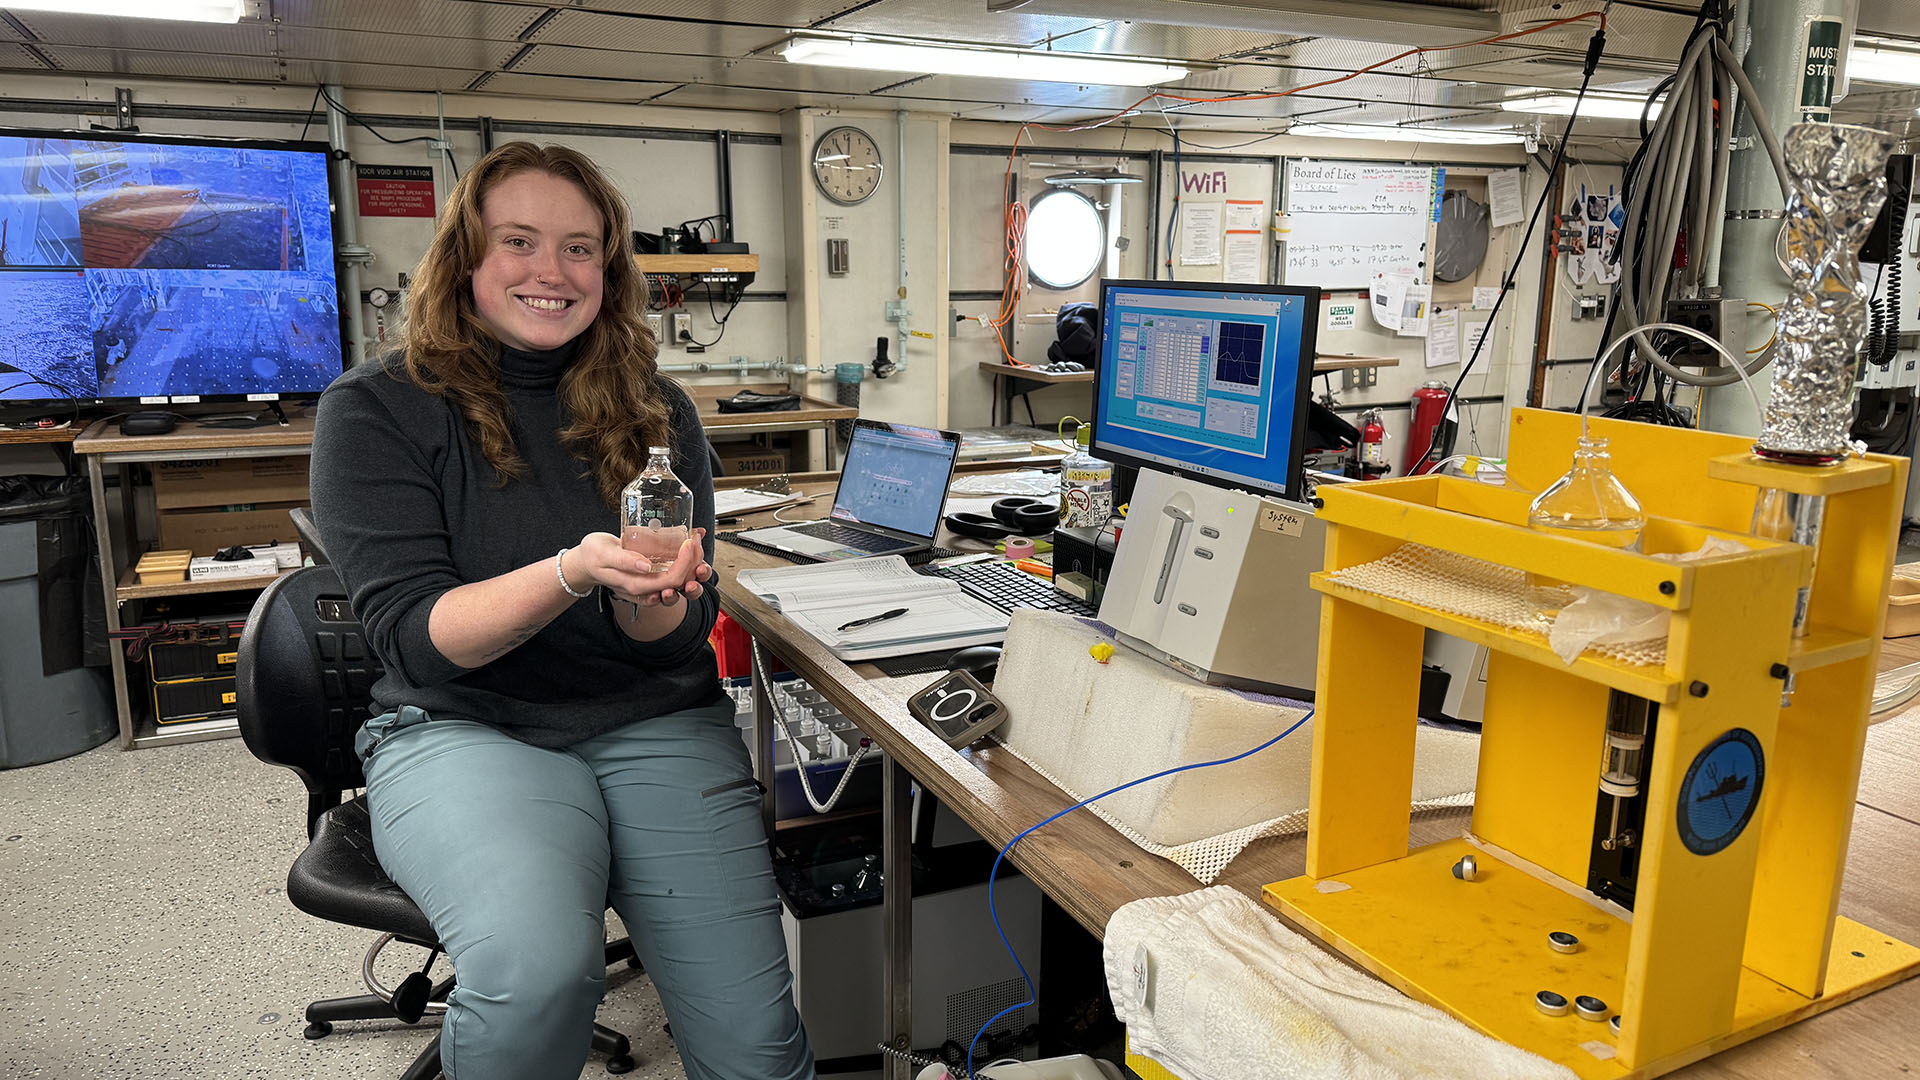 Cora sits at the pH analysis system onboard the R/V Thompson. Image by Jennifer Magnusson